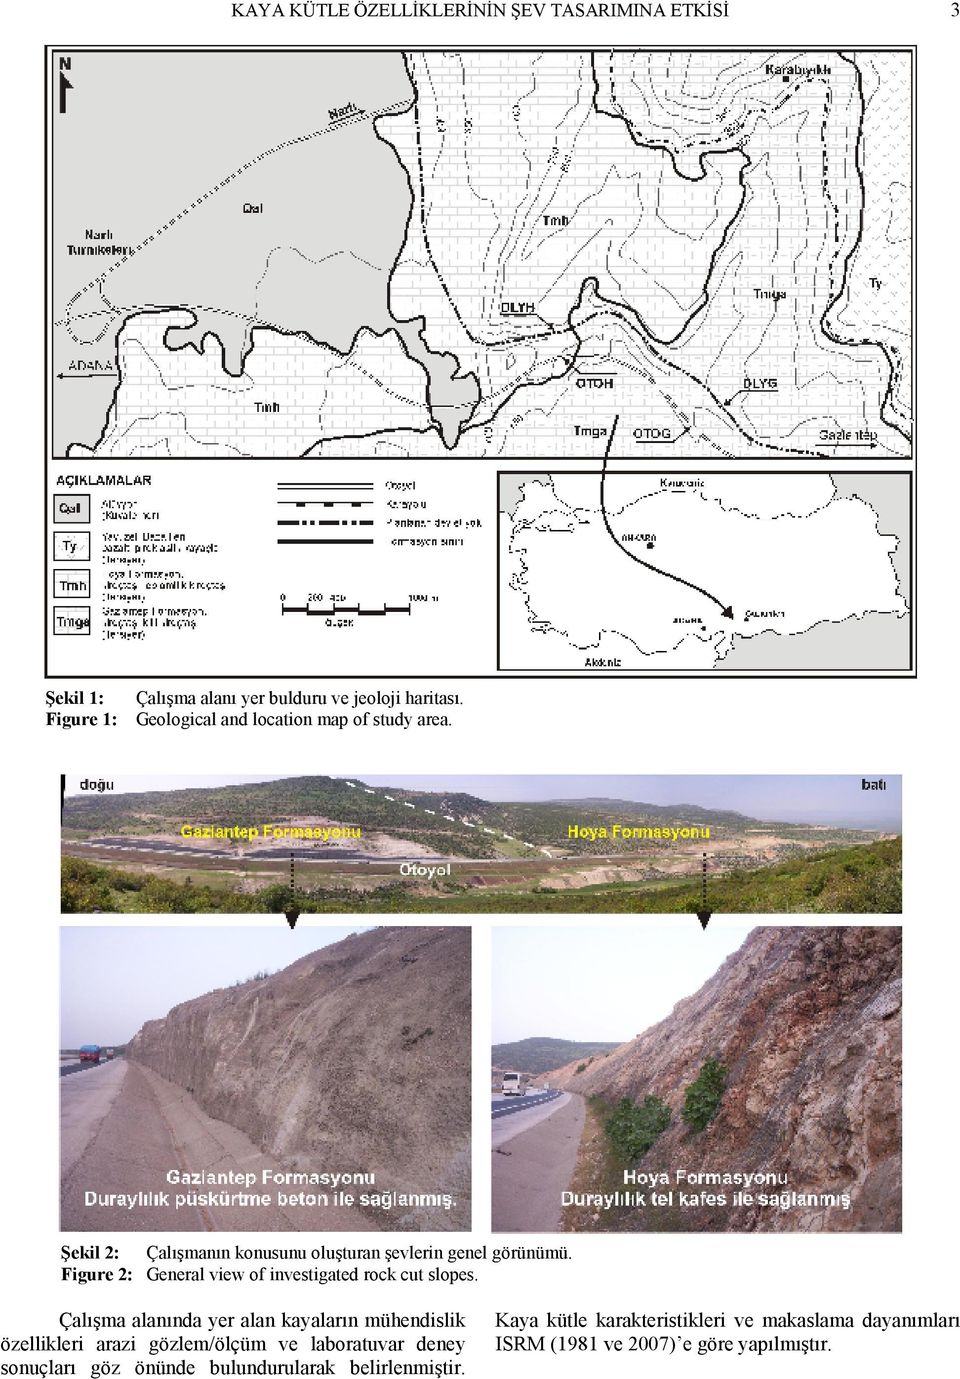 Figure 2: General view of investigated rock cut slopes.